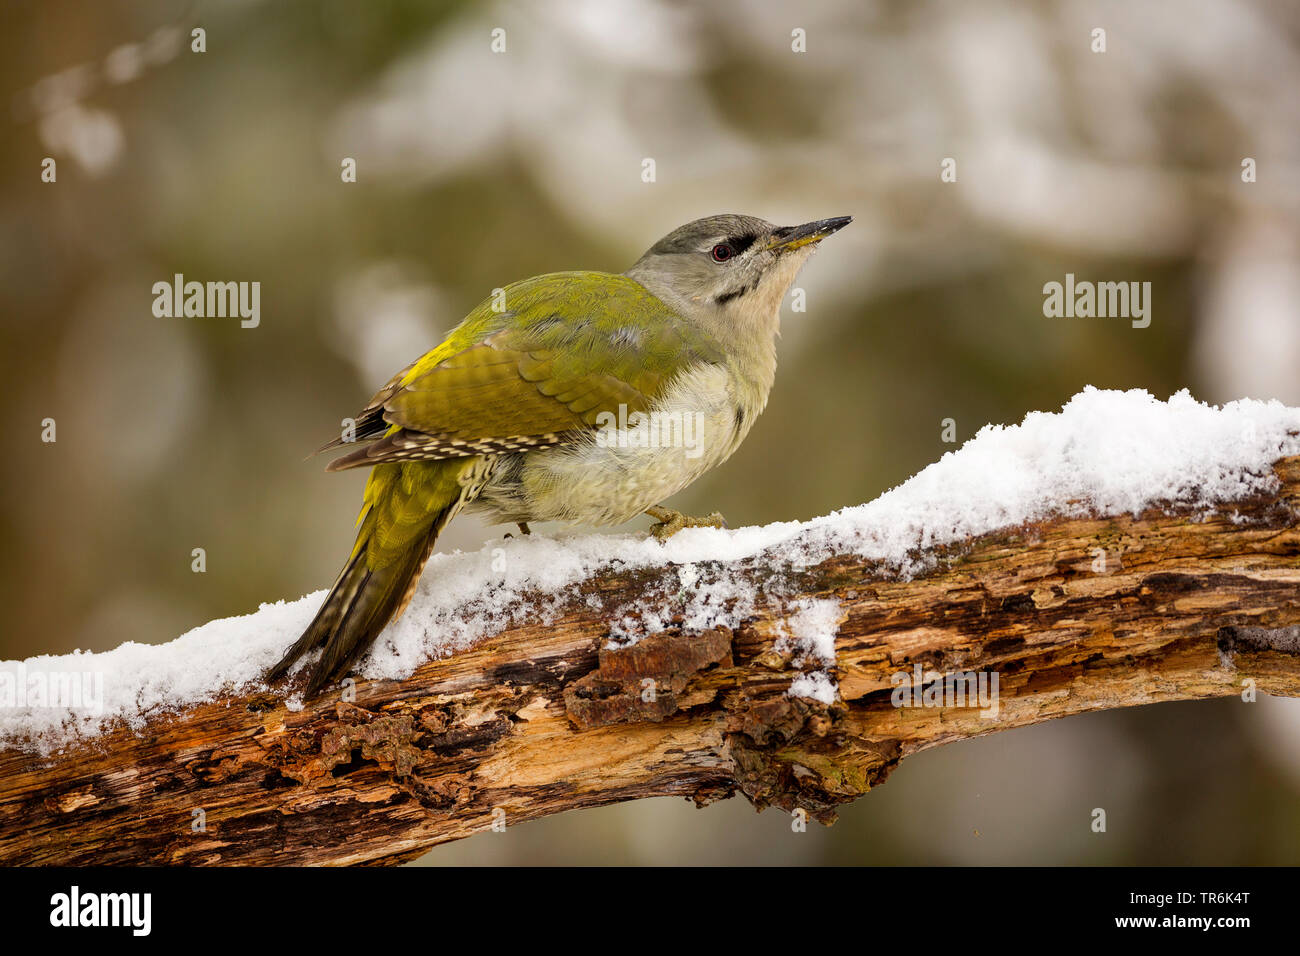 grey-faced woodpecker (Picus canus), sitting on a snow-covered branch, Germany Stock Photo